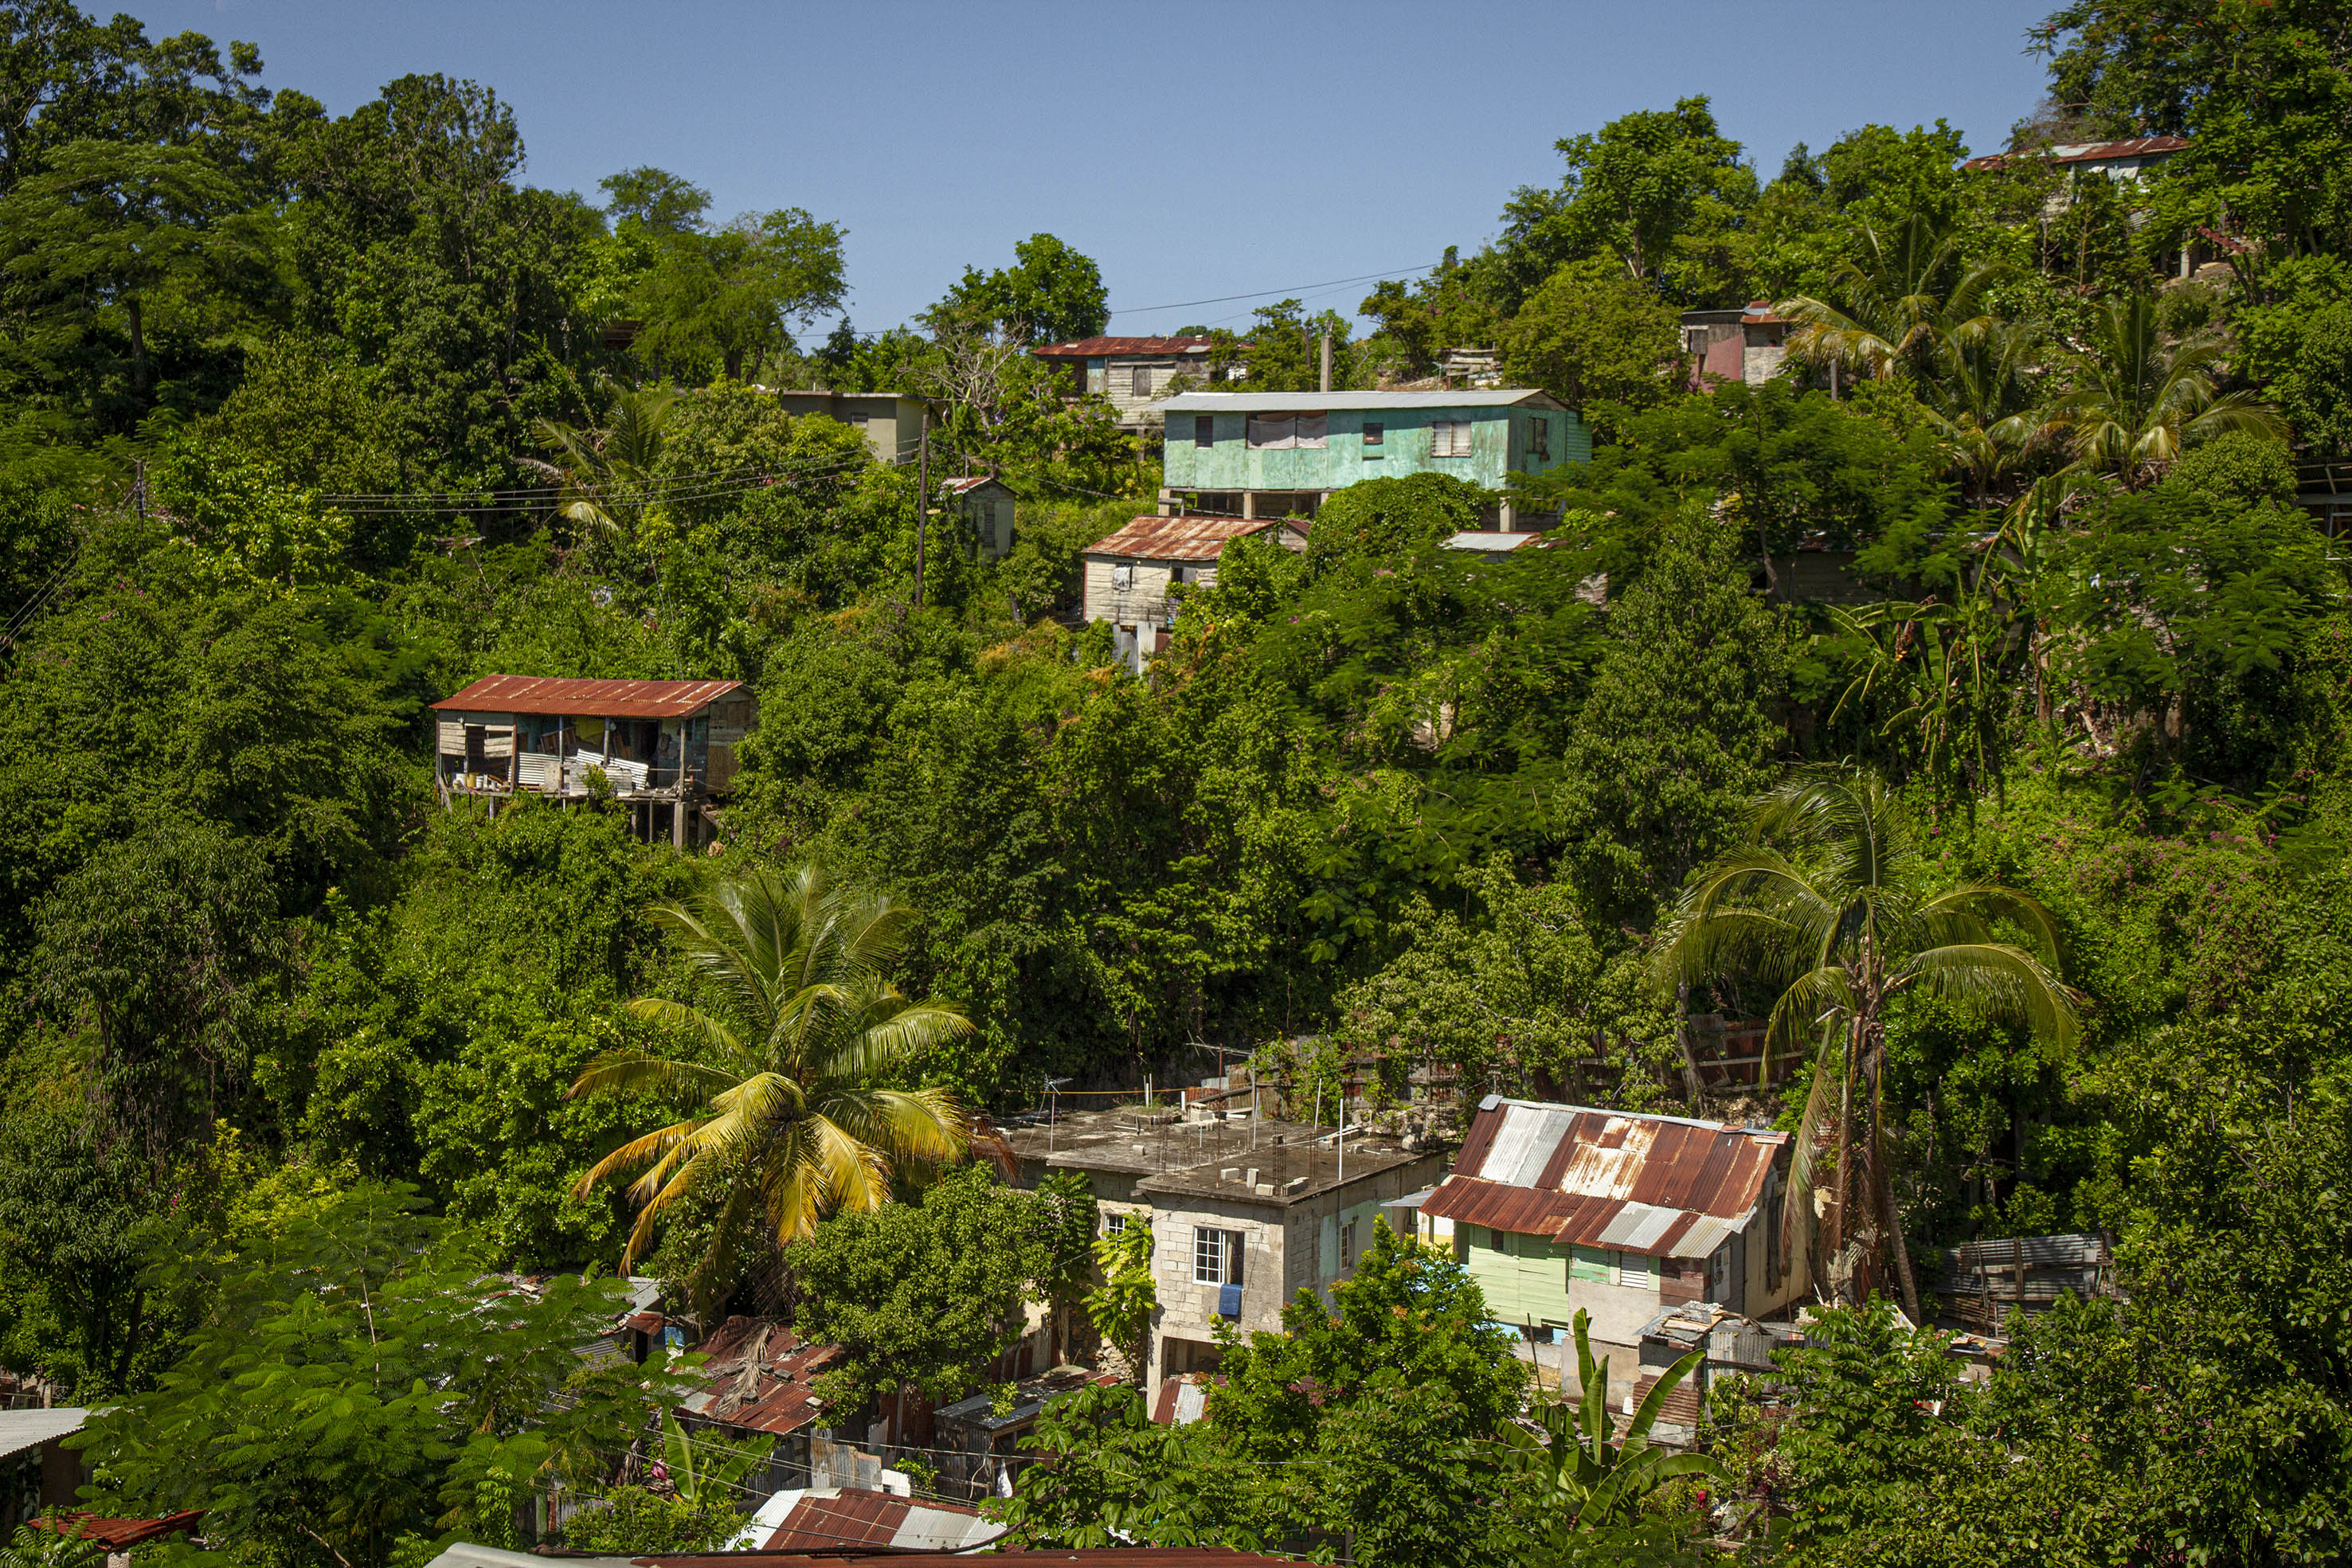 Houses perched on the hill in North Gully, Montego Bay, Jamaica.